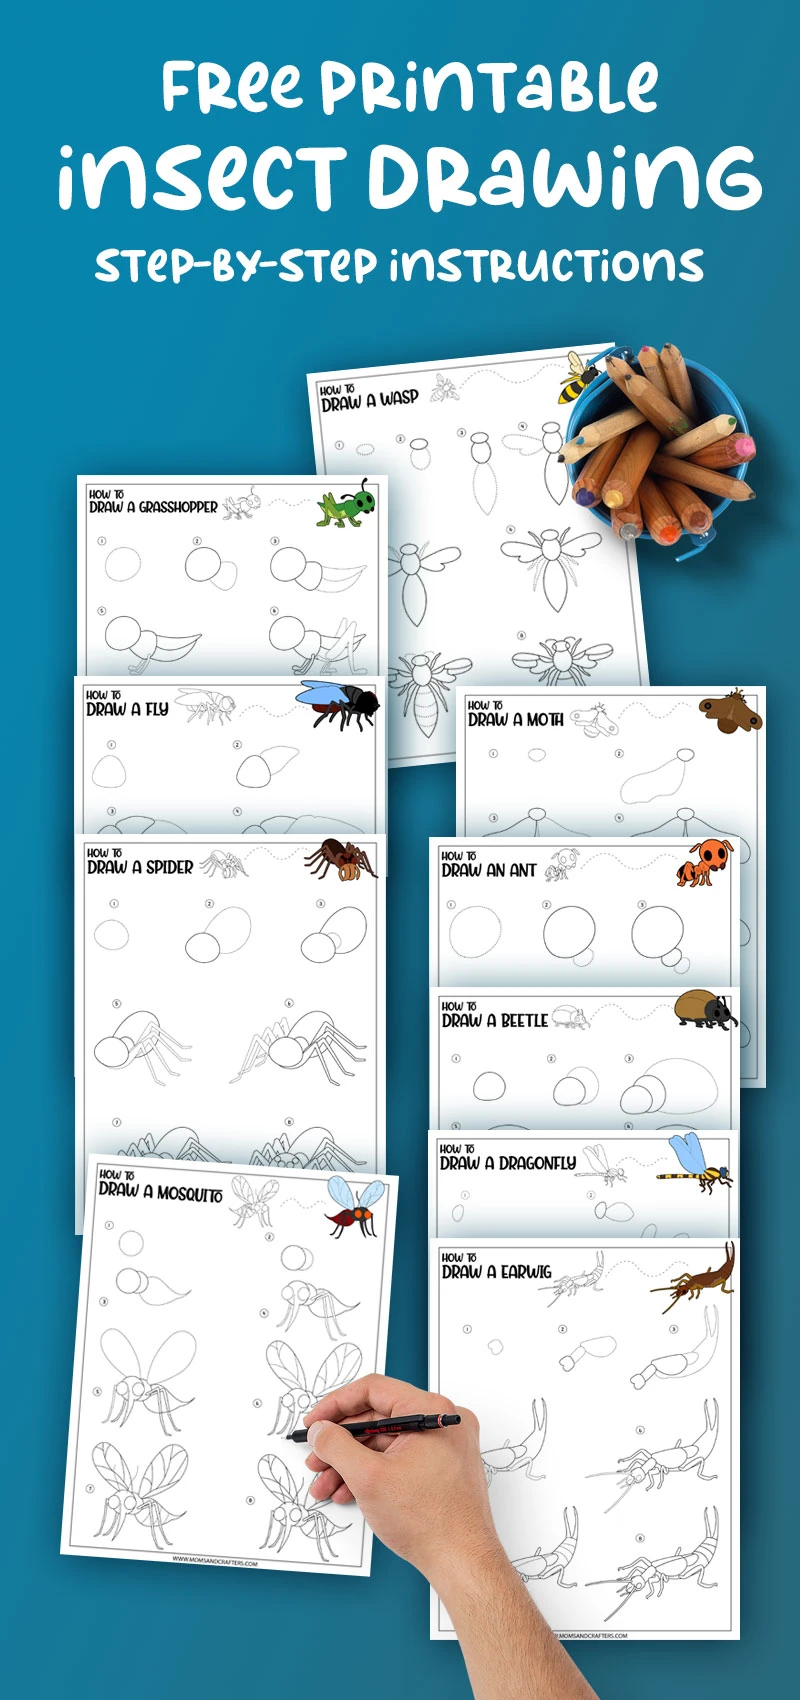 hot to draw insects hero image with props